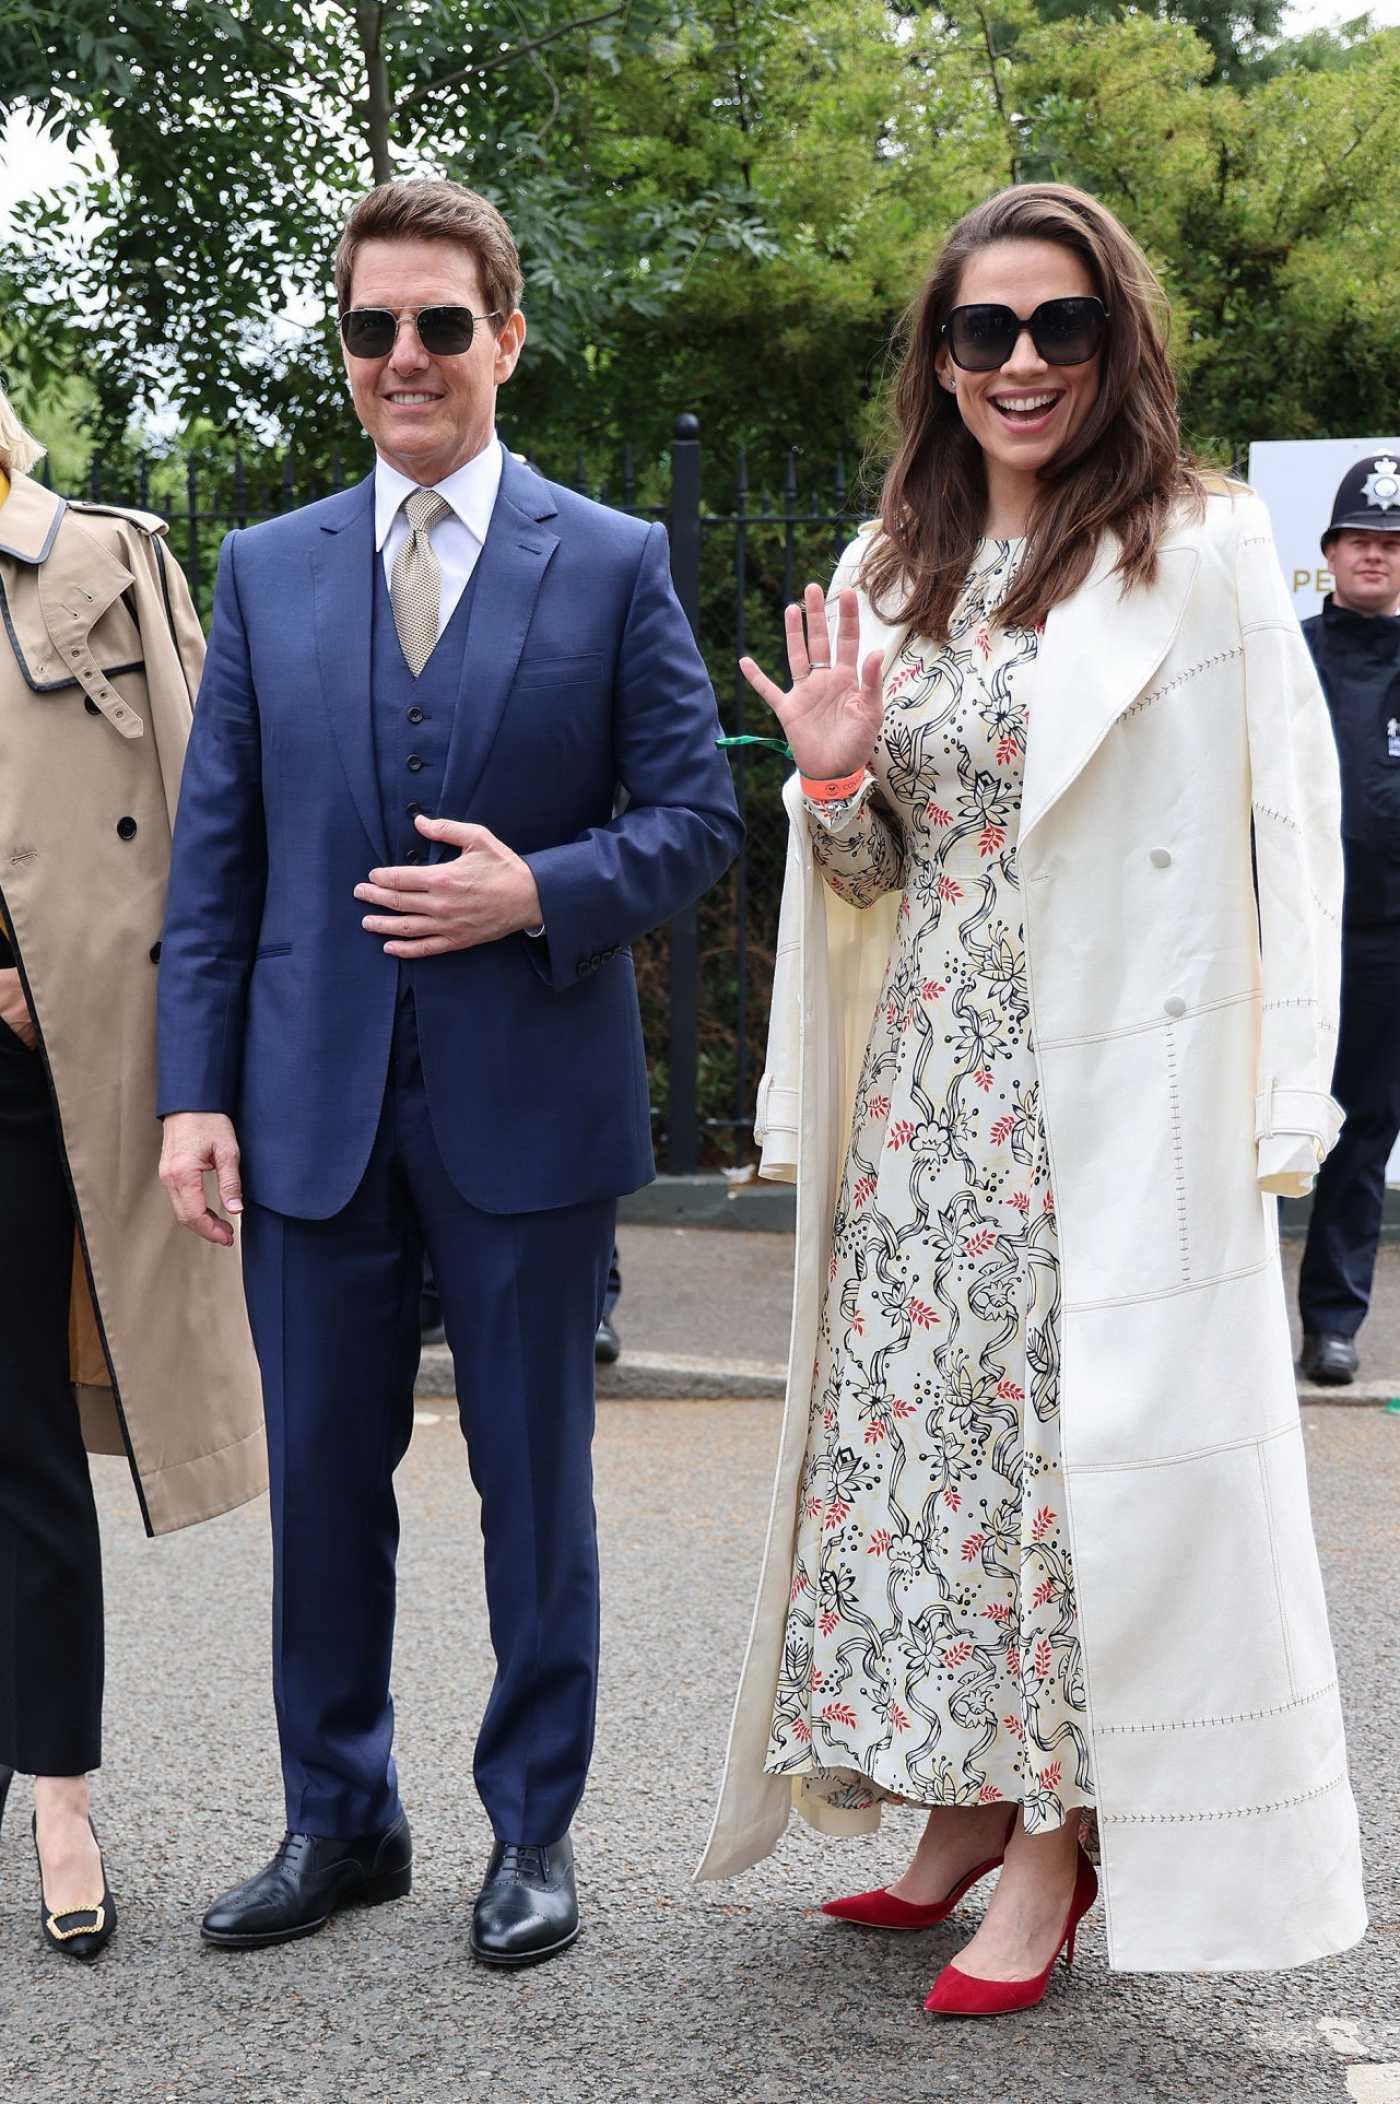 Hayley Atwell in a White Trench Coat Attends the Wimbledon Championships Tennis Tournament Out with Tom Cruise in London 07/10/2021